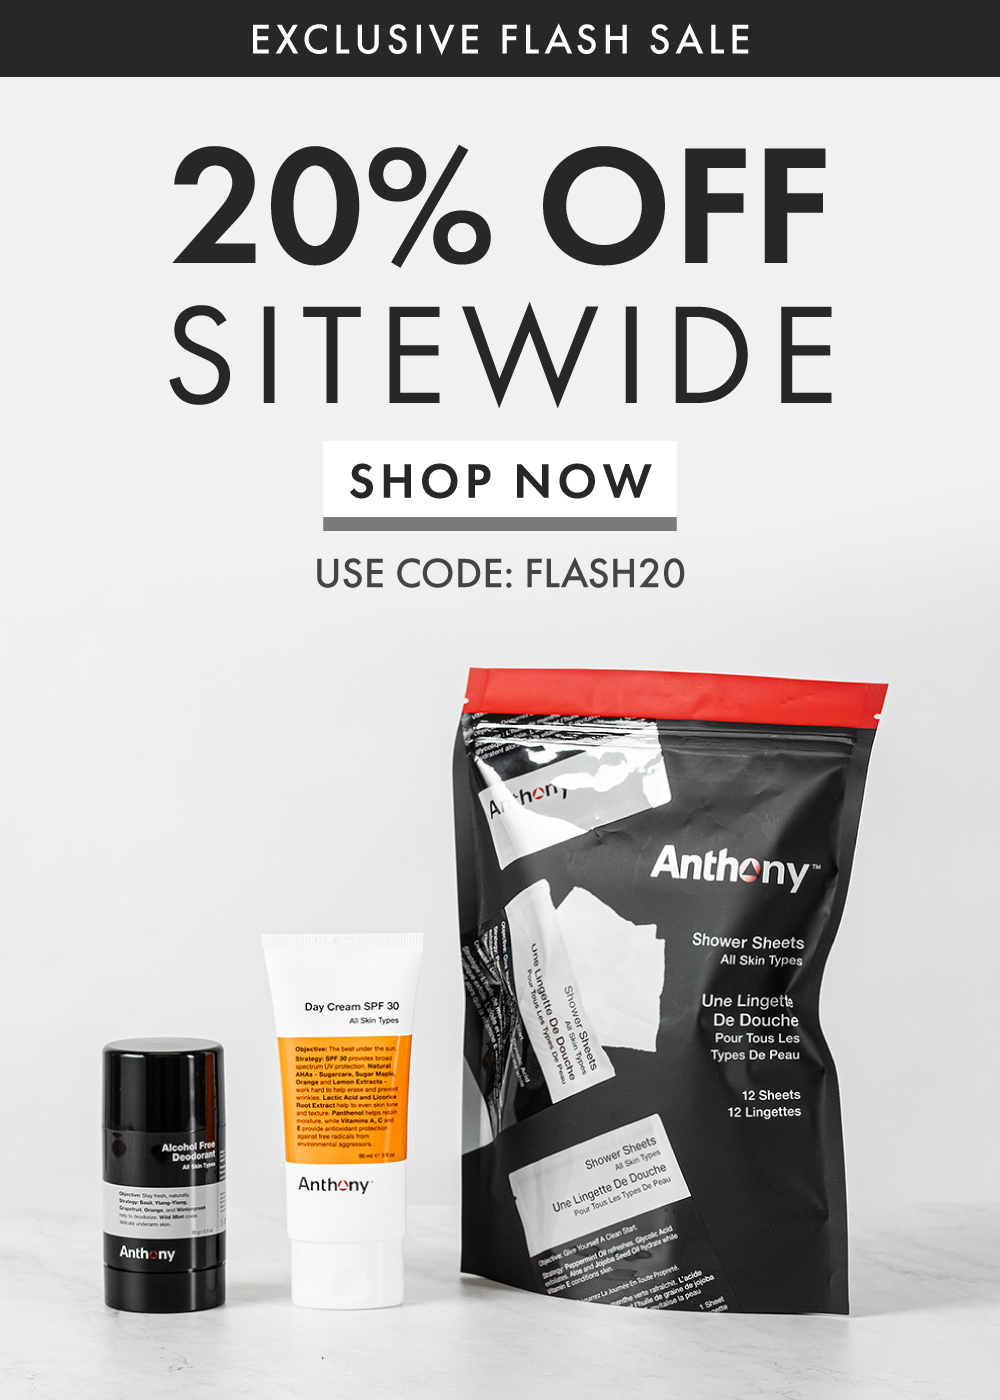 Today Only 20% Off Site-Wide Flash Sale! Use Code: FLASH20